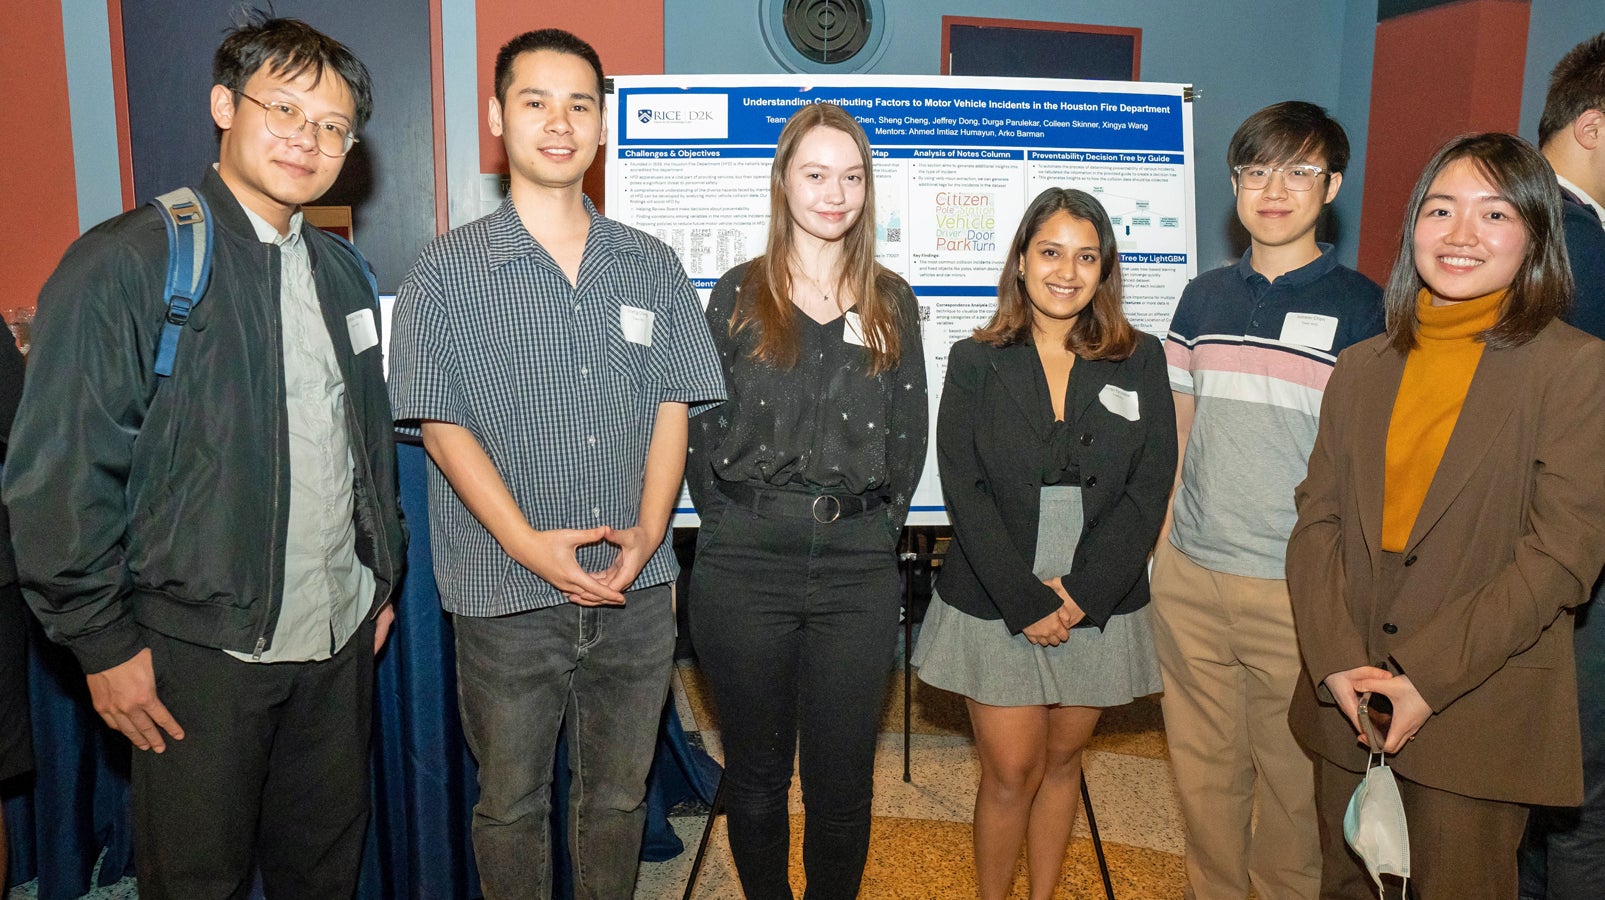 Photo caption: Team HFD - Yuanhao Dong, Sheng Cheng, Colleen Skinner, Durga Parulekar, Junwei Chen and Xingya Wang – helped the Houston Fire Department identify likely causes of traffic incidents that can impact their response rate. 